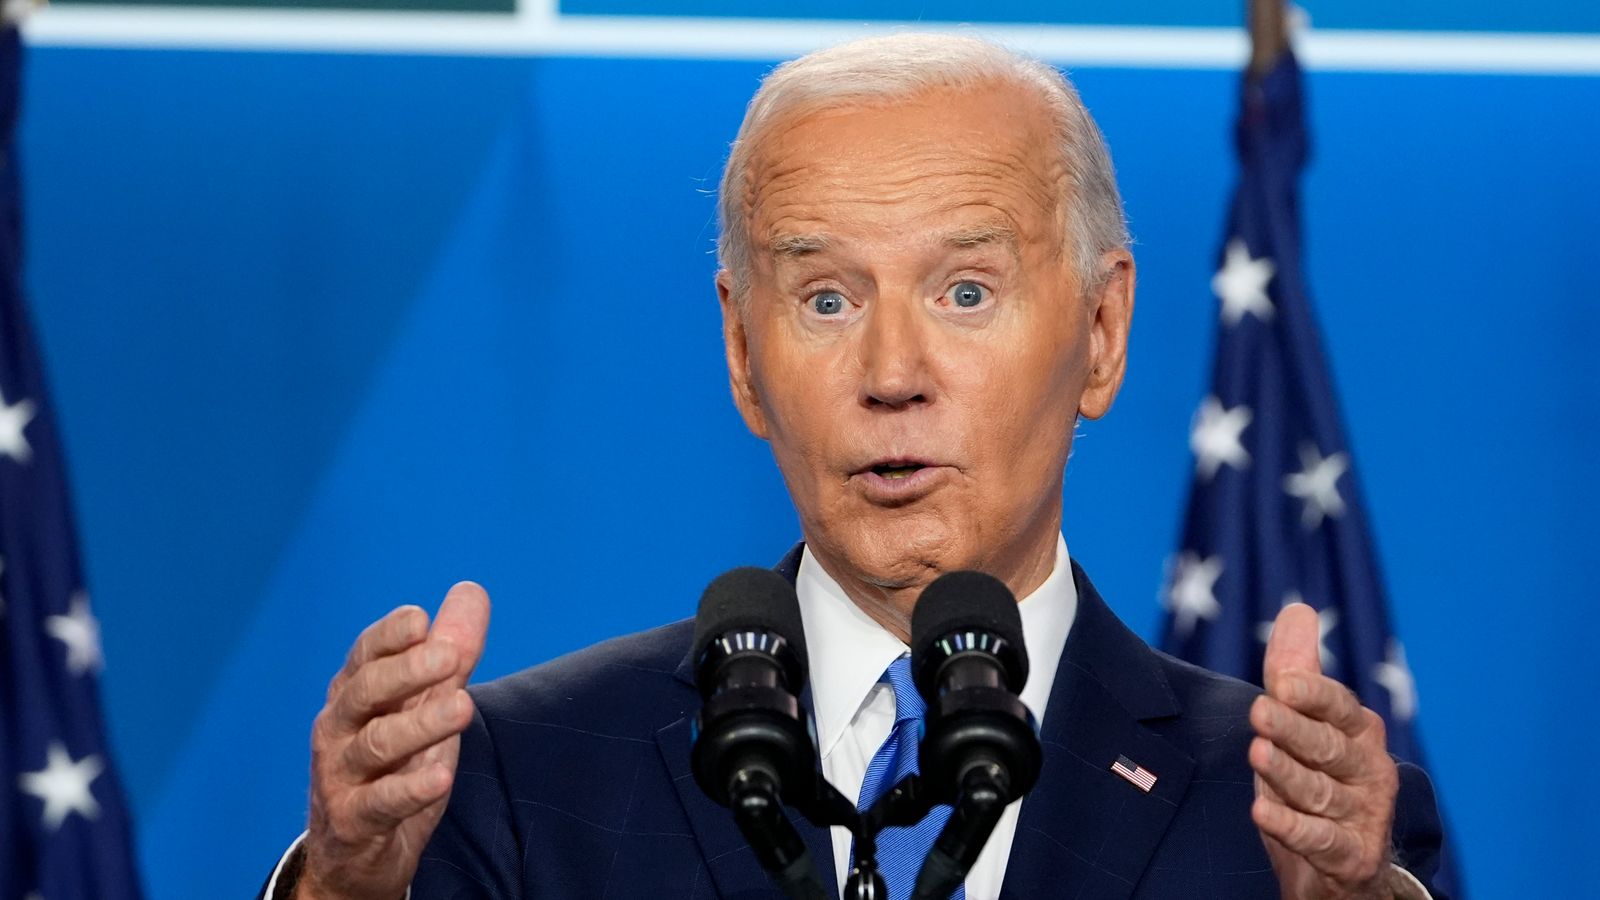 President Biden’s various gaffes over the years